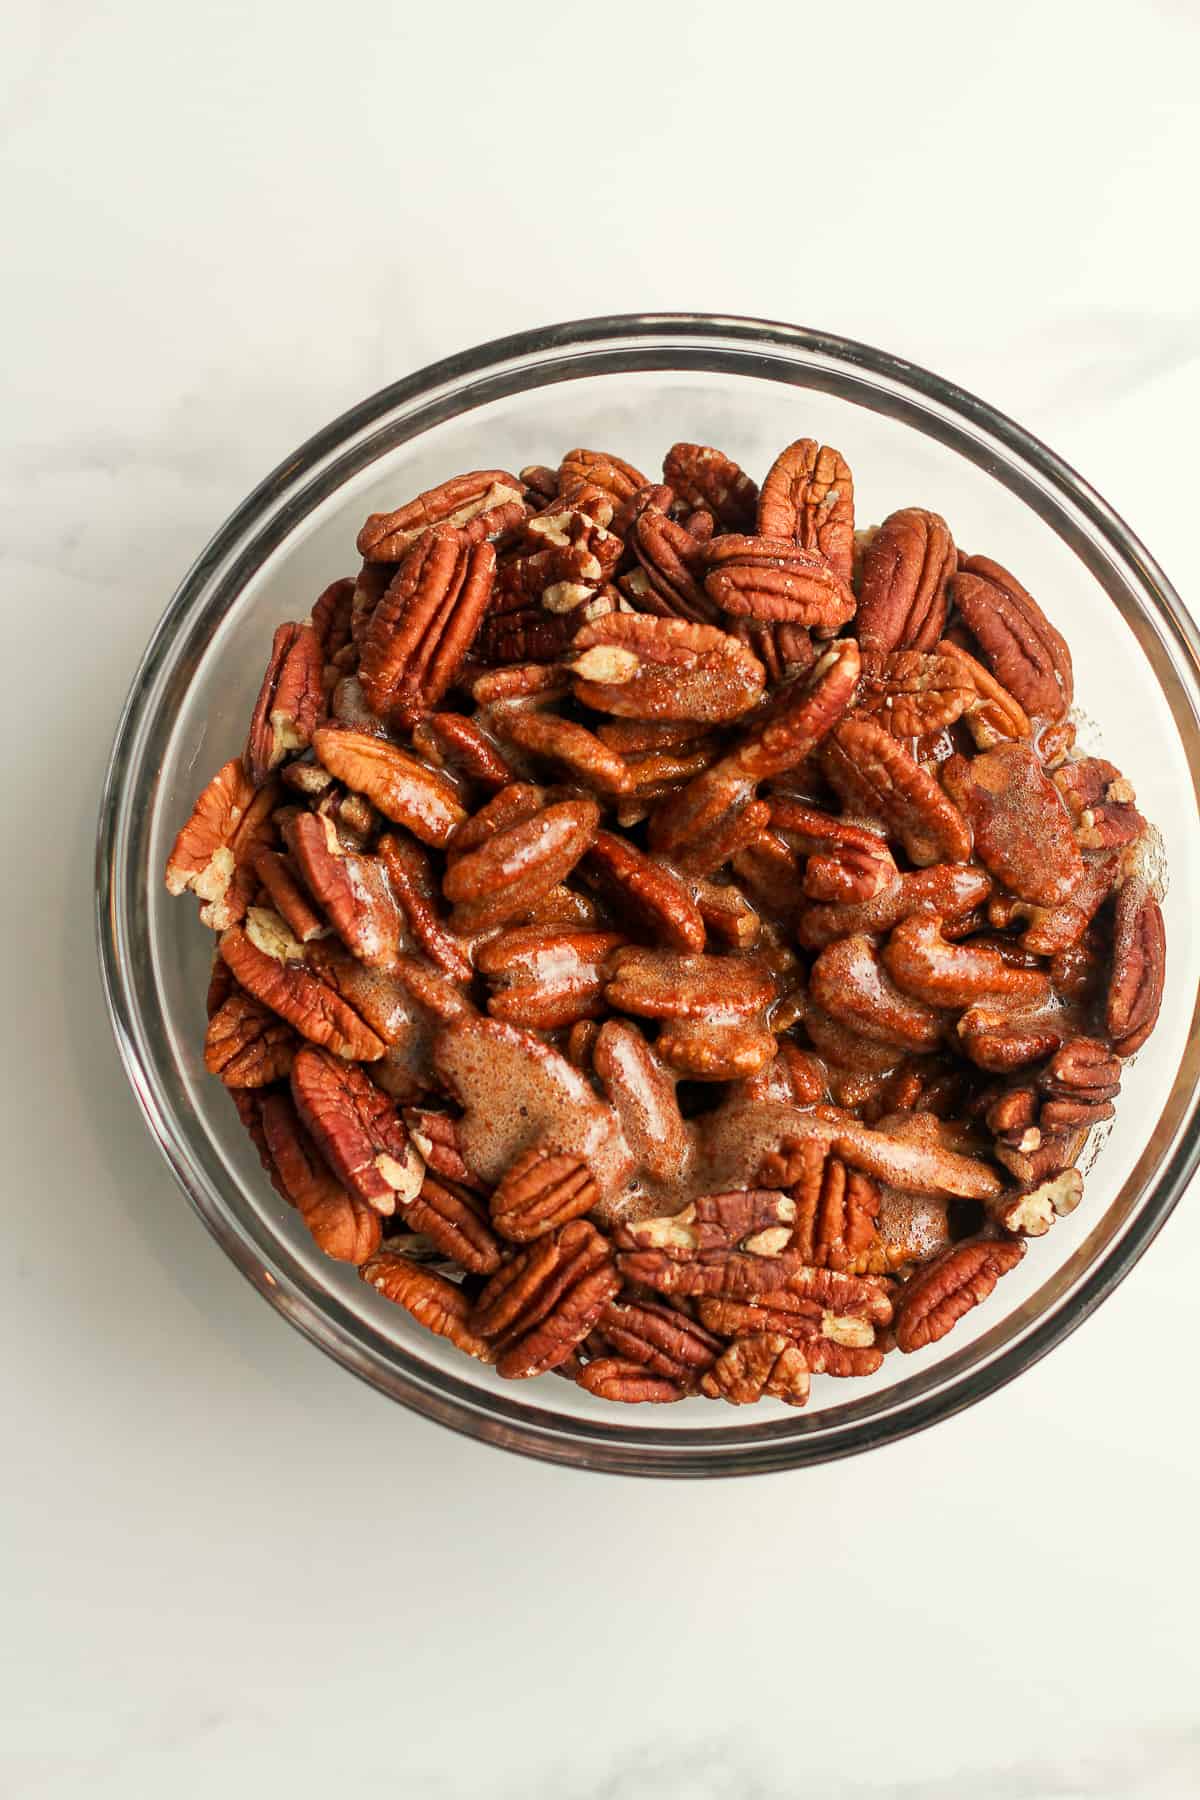 A bowl of the pecans plus sweetener on top.